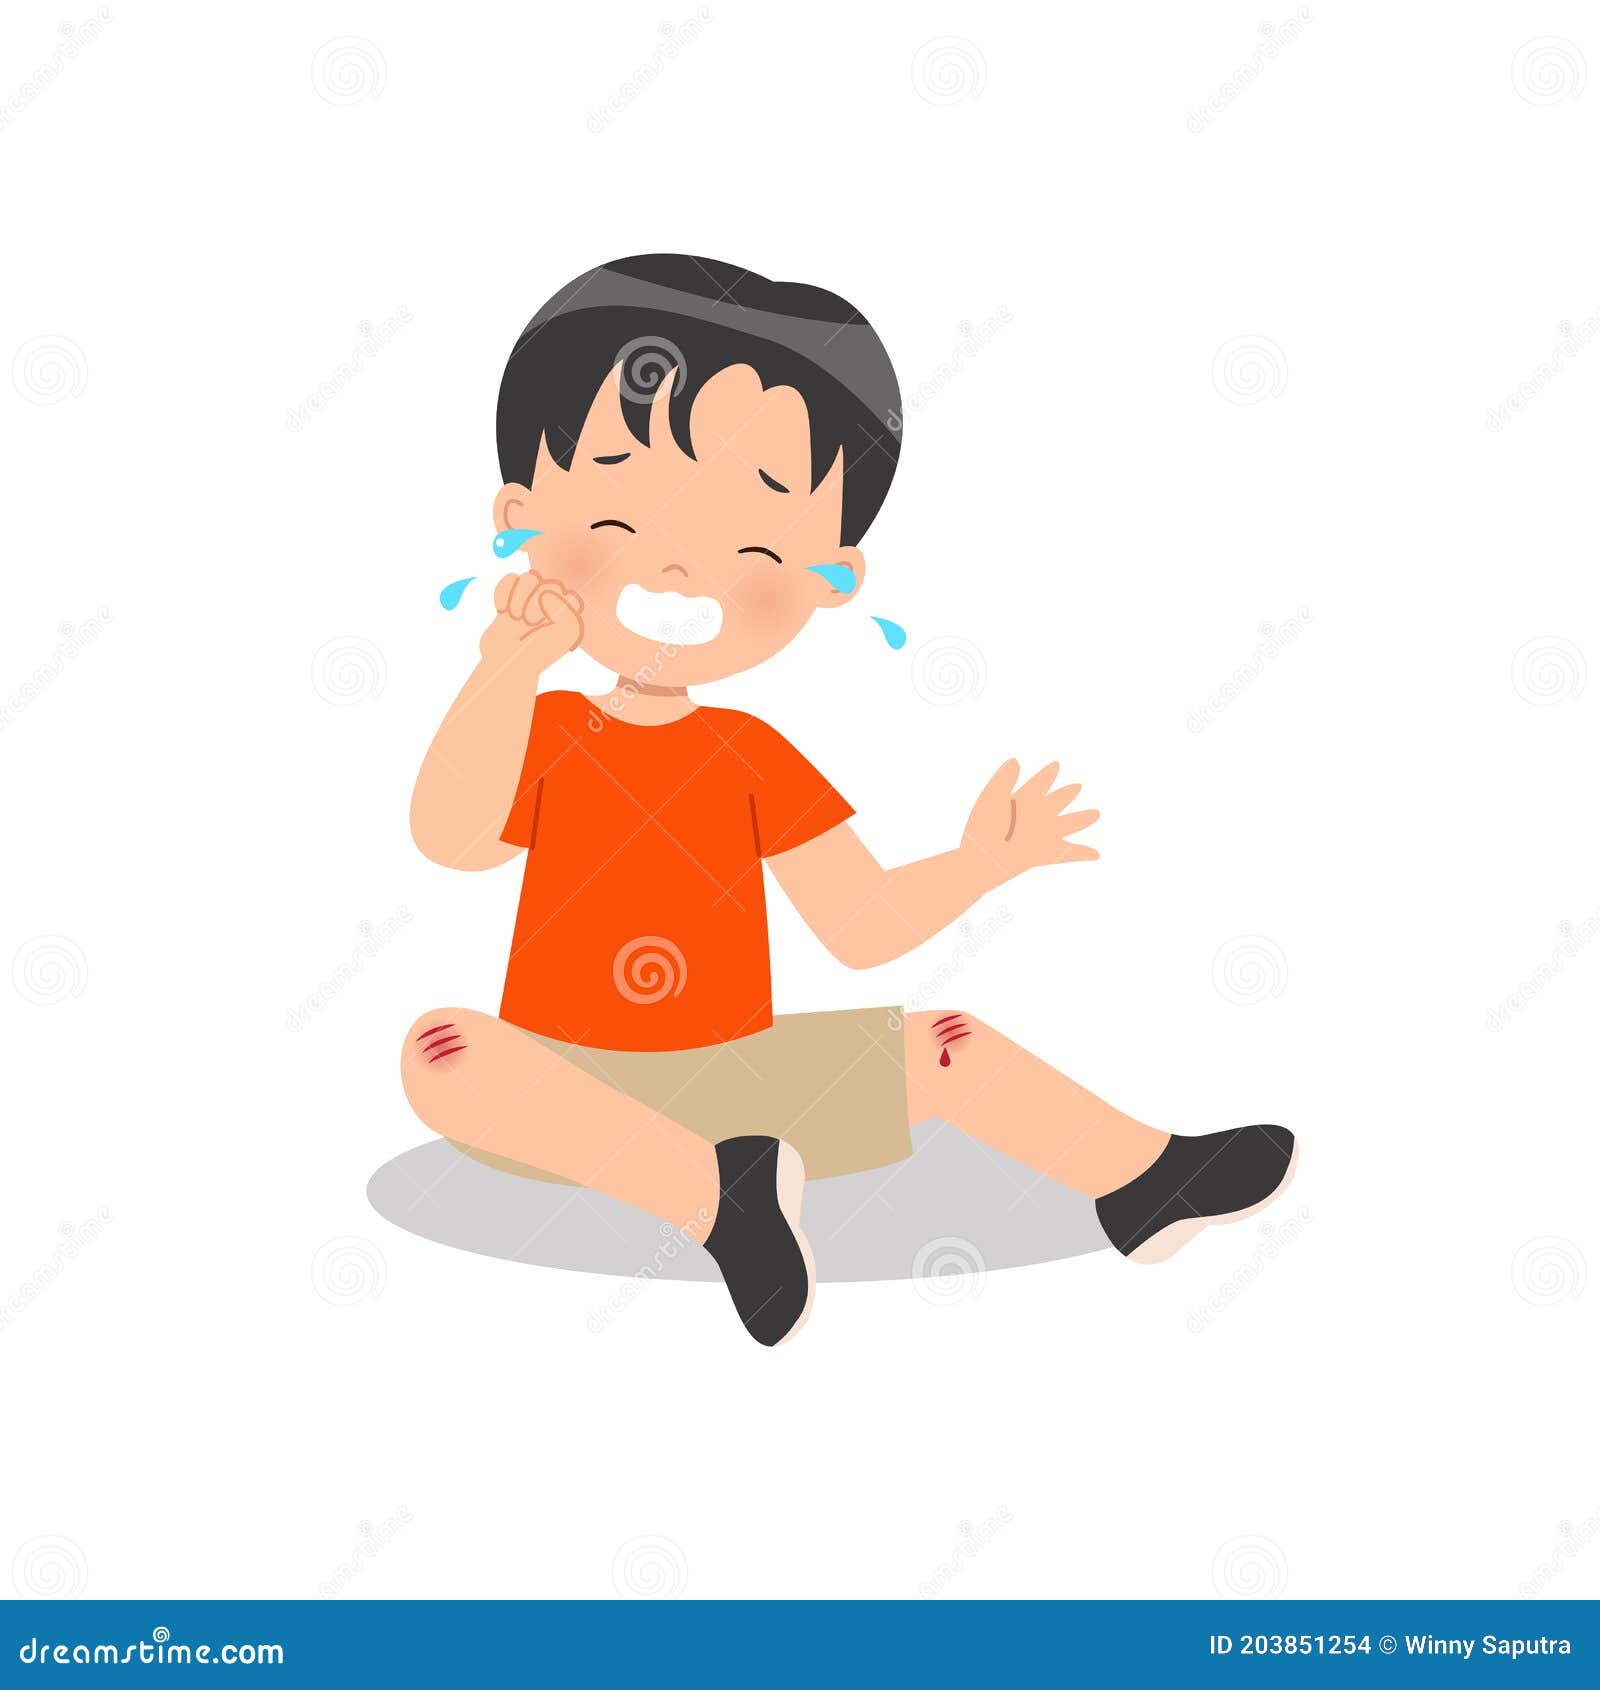 Sad Boy Crying Over His Bleeding Knee. Accident. Parenting Clip Art Stock  Vector - Illustration of injured, character: 203851254